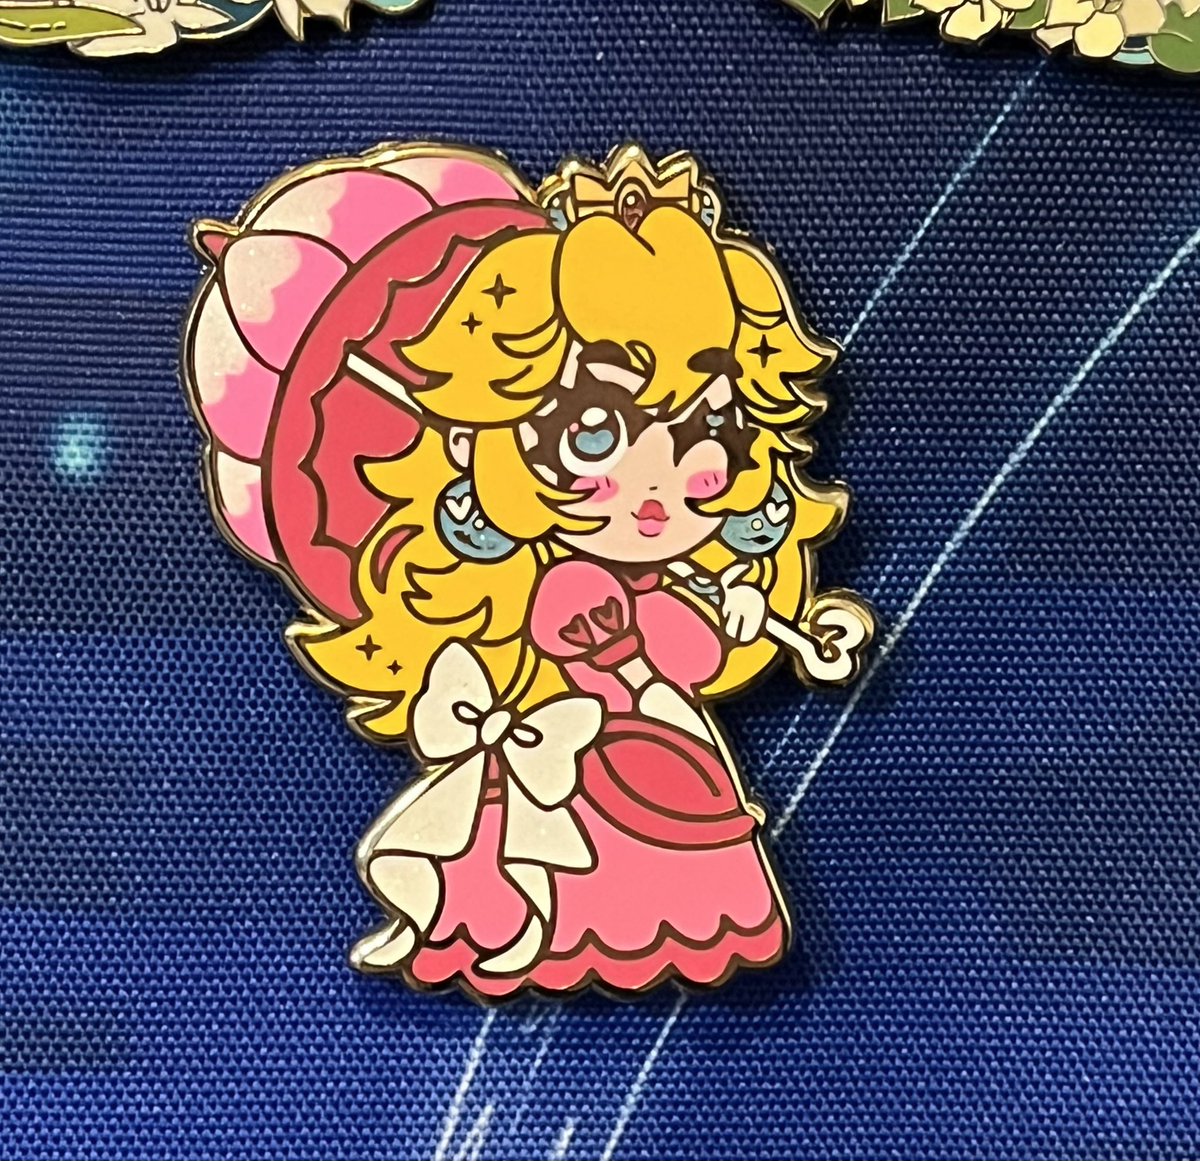 THE PINS I DESIGNED CAME this isn't the best photo but she's so CUTE!!
#PrincessPeach #enamelpin